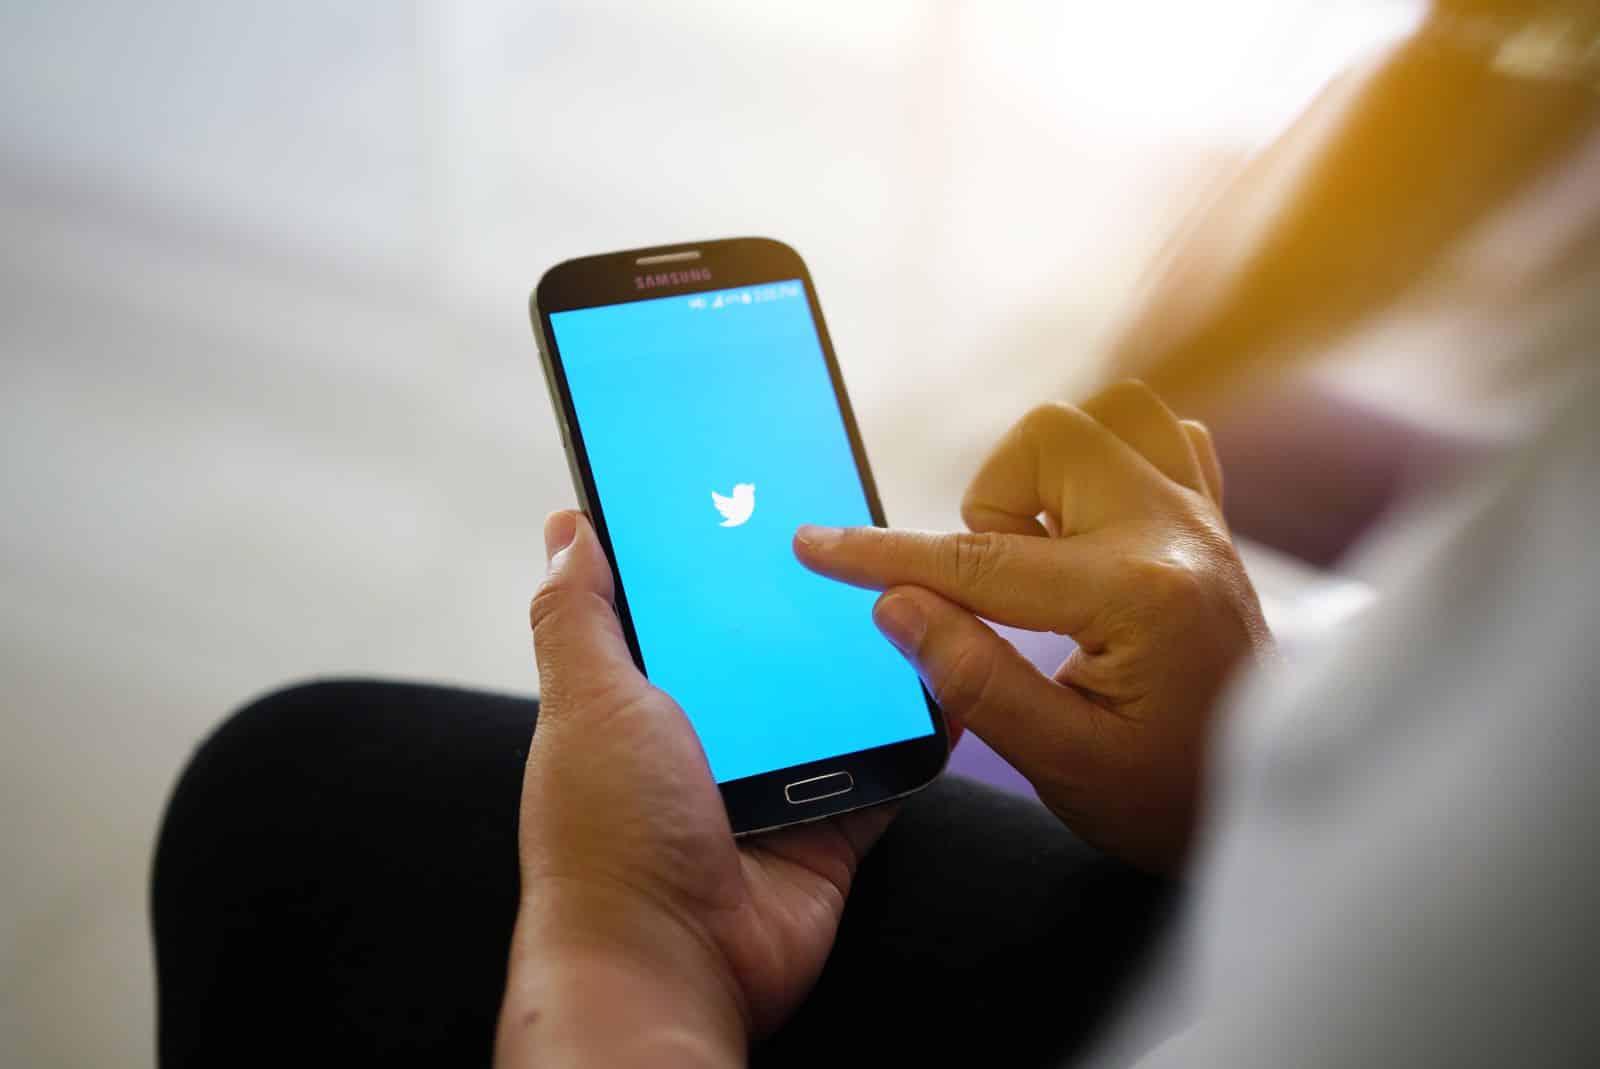 Image Credit: Shutterstock / ideadesign <p><span>The rise of social media has transformed feminist discourse, with platforms like Twitter becoming battlegrounds for debates over feminism, leading to both empowerment and significant backlash against feminist voices.</span></p>